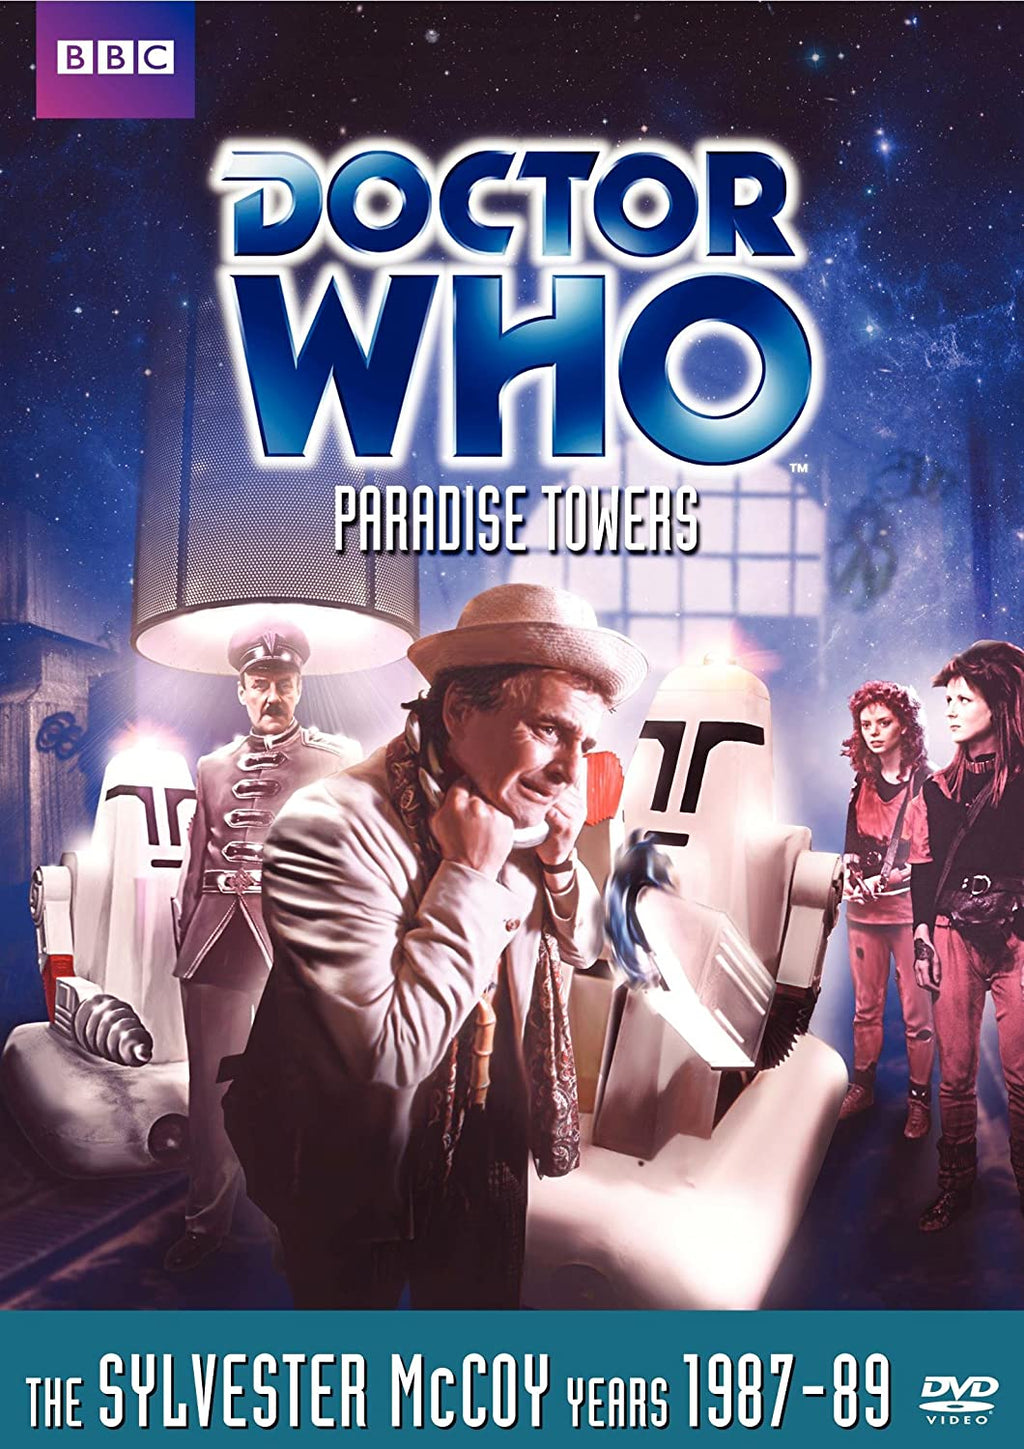 DOCTOR WHO Classic DVD: Paradise Towers